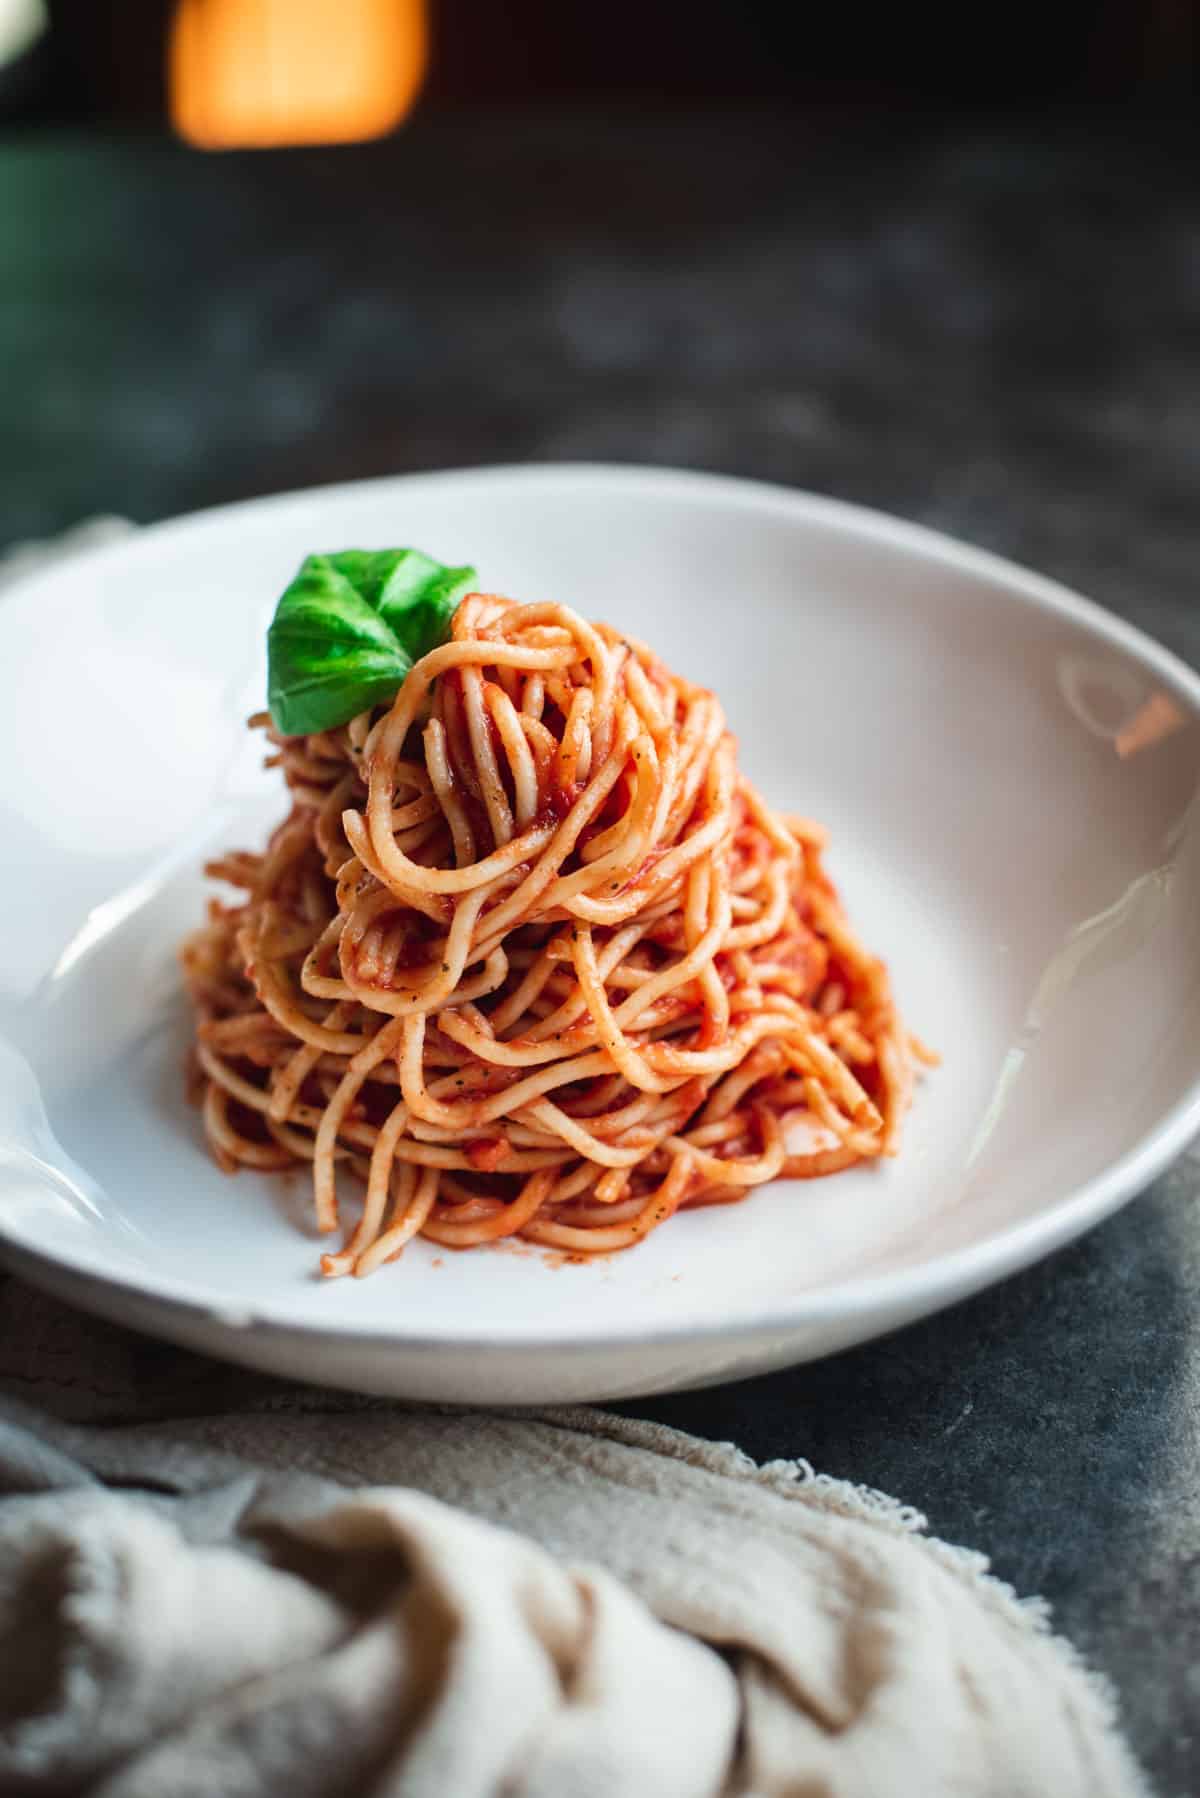 A tower of spaghetti mixed with the homemade pasta sauce is in a white bowl and garnished with a fresh basil leaf.